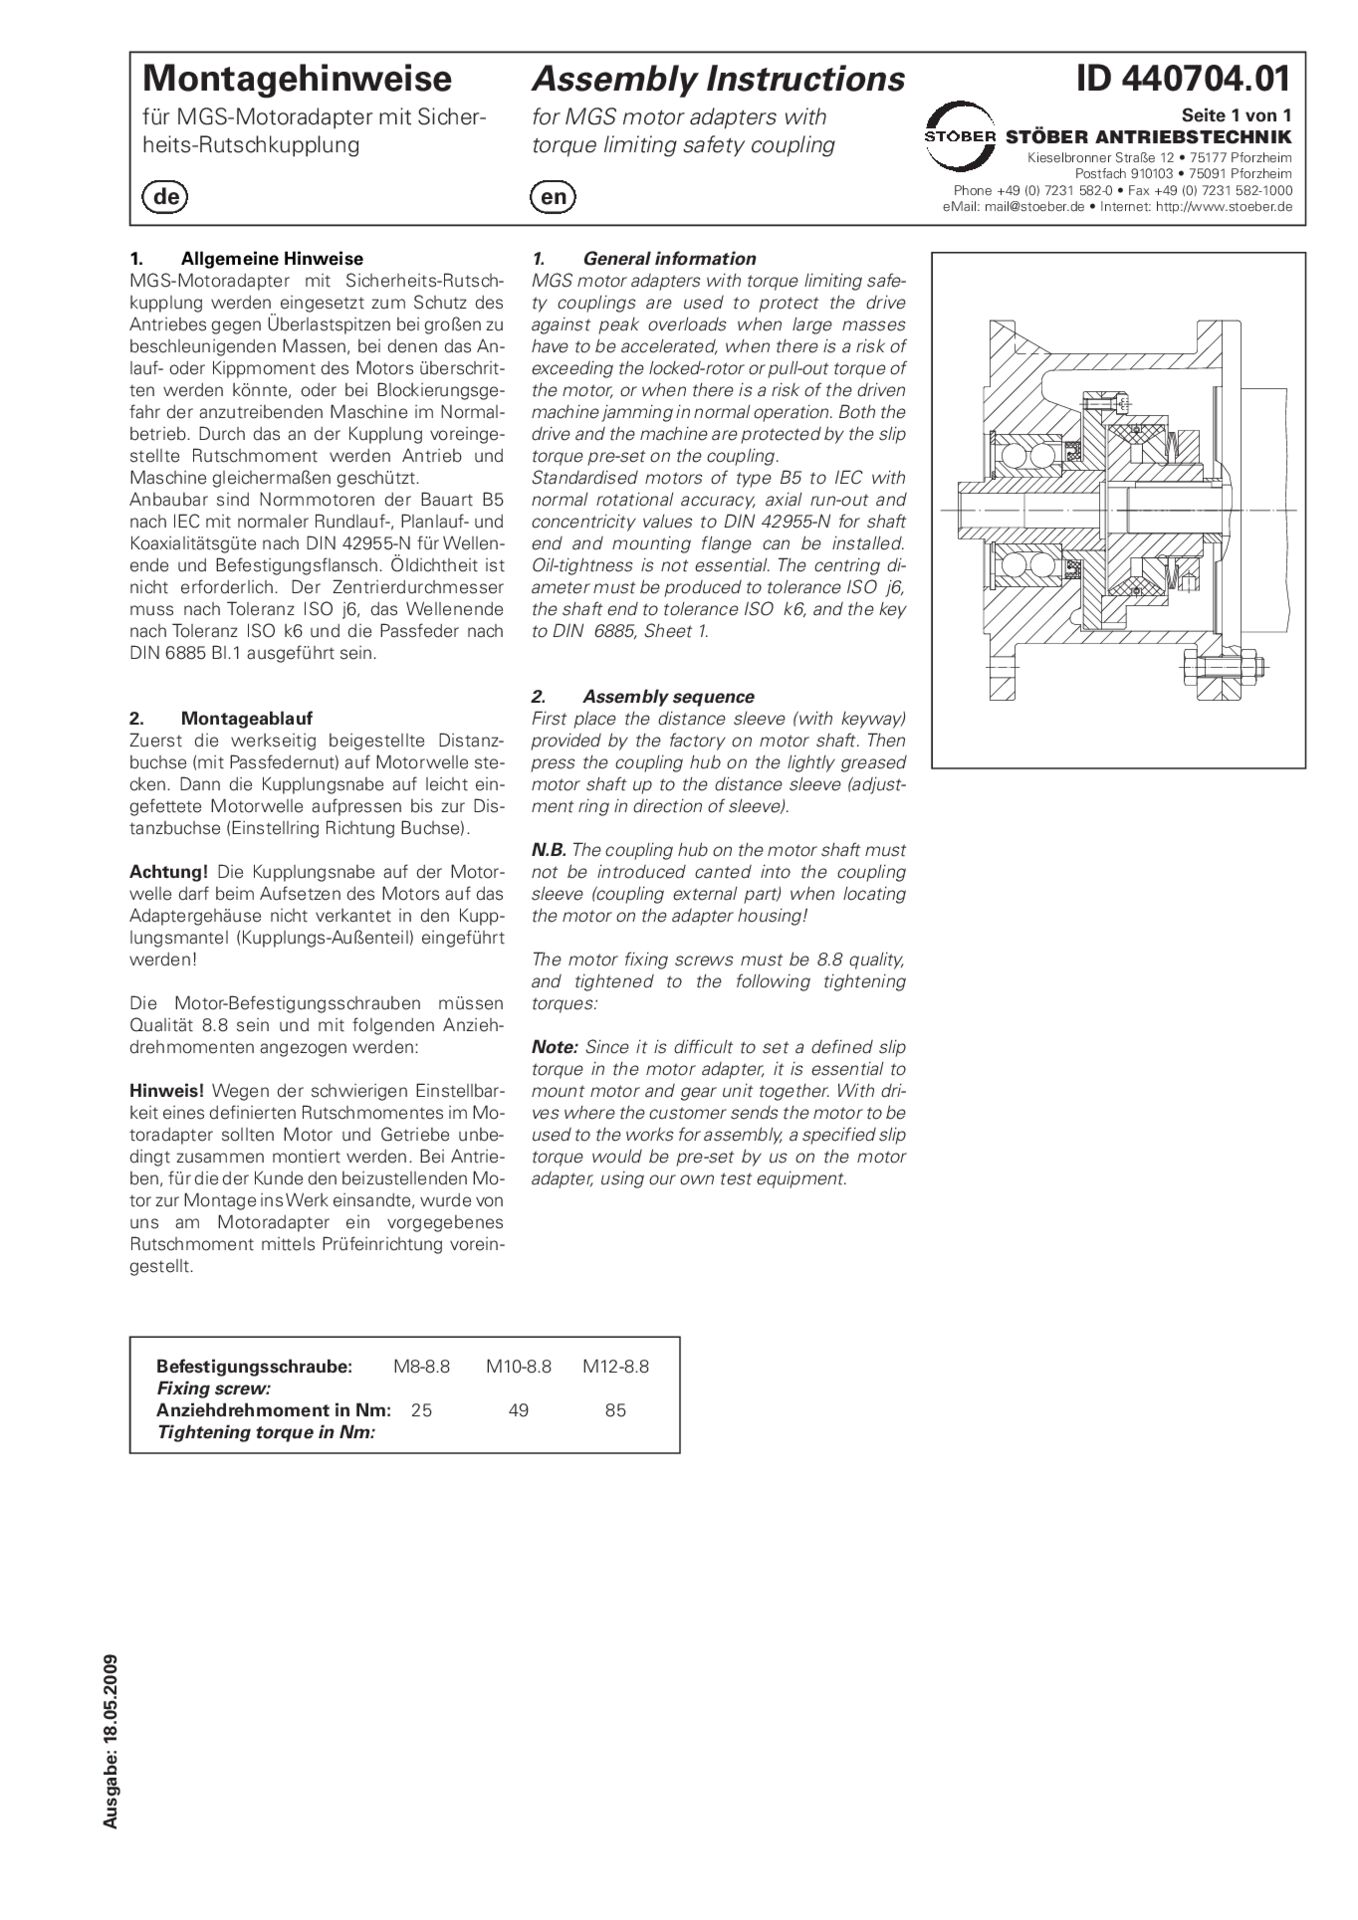 Montageanleitung MGS-Motoradapter mit Sicherheits-RutschkupplungAssembly instructions MGS motor adapter with torque limiting safety coupling